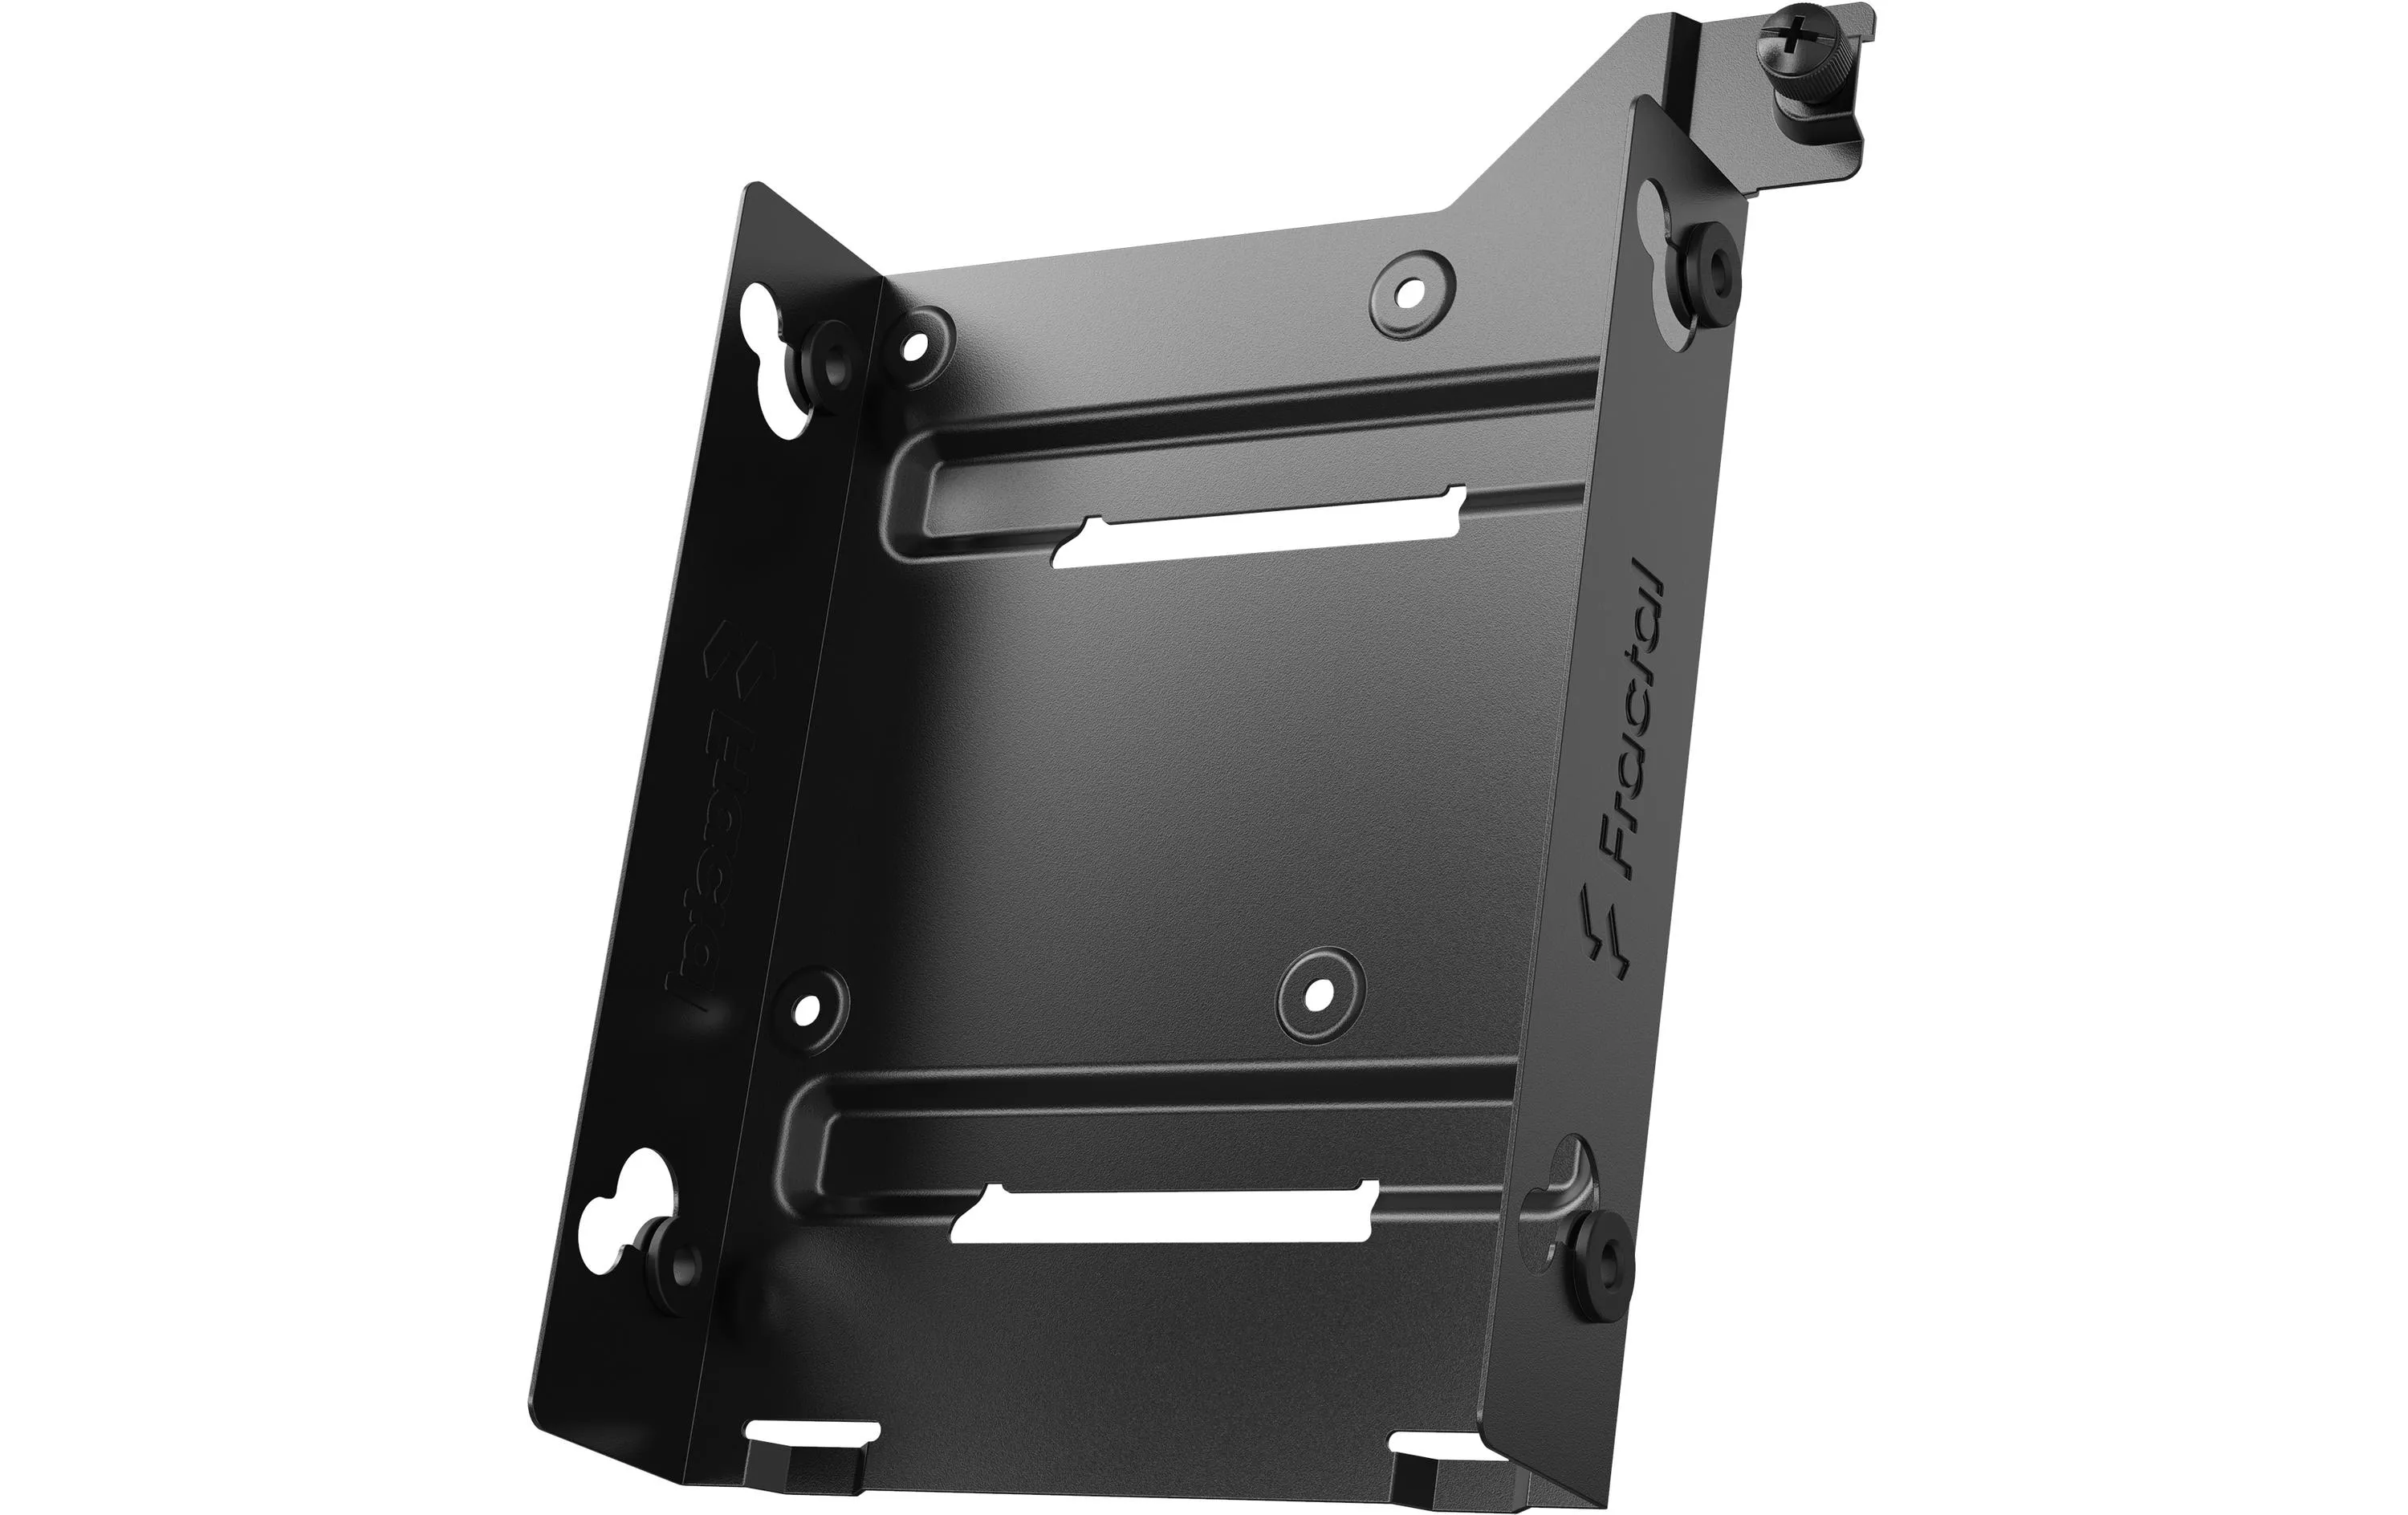 Cadre de montage HDD tray kit Type D